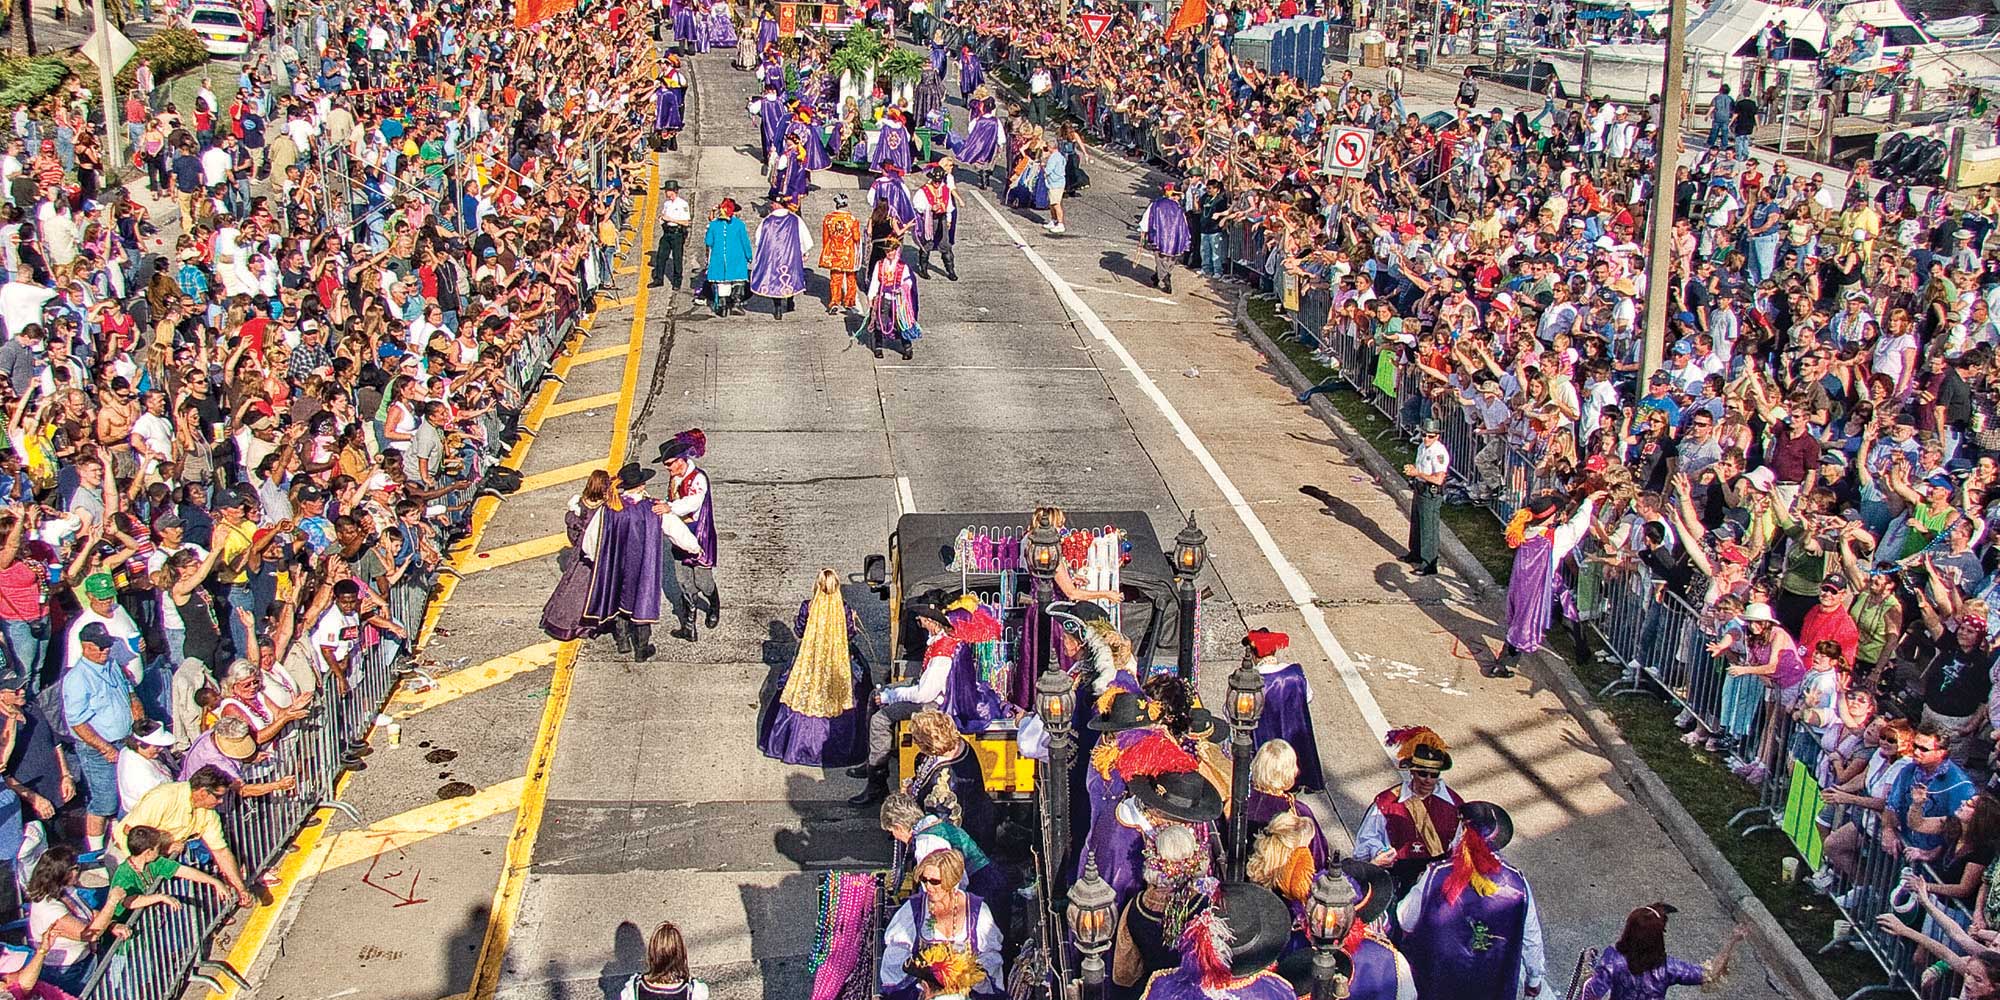 An aerial view of the parade.